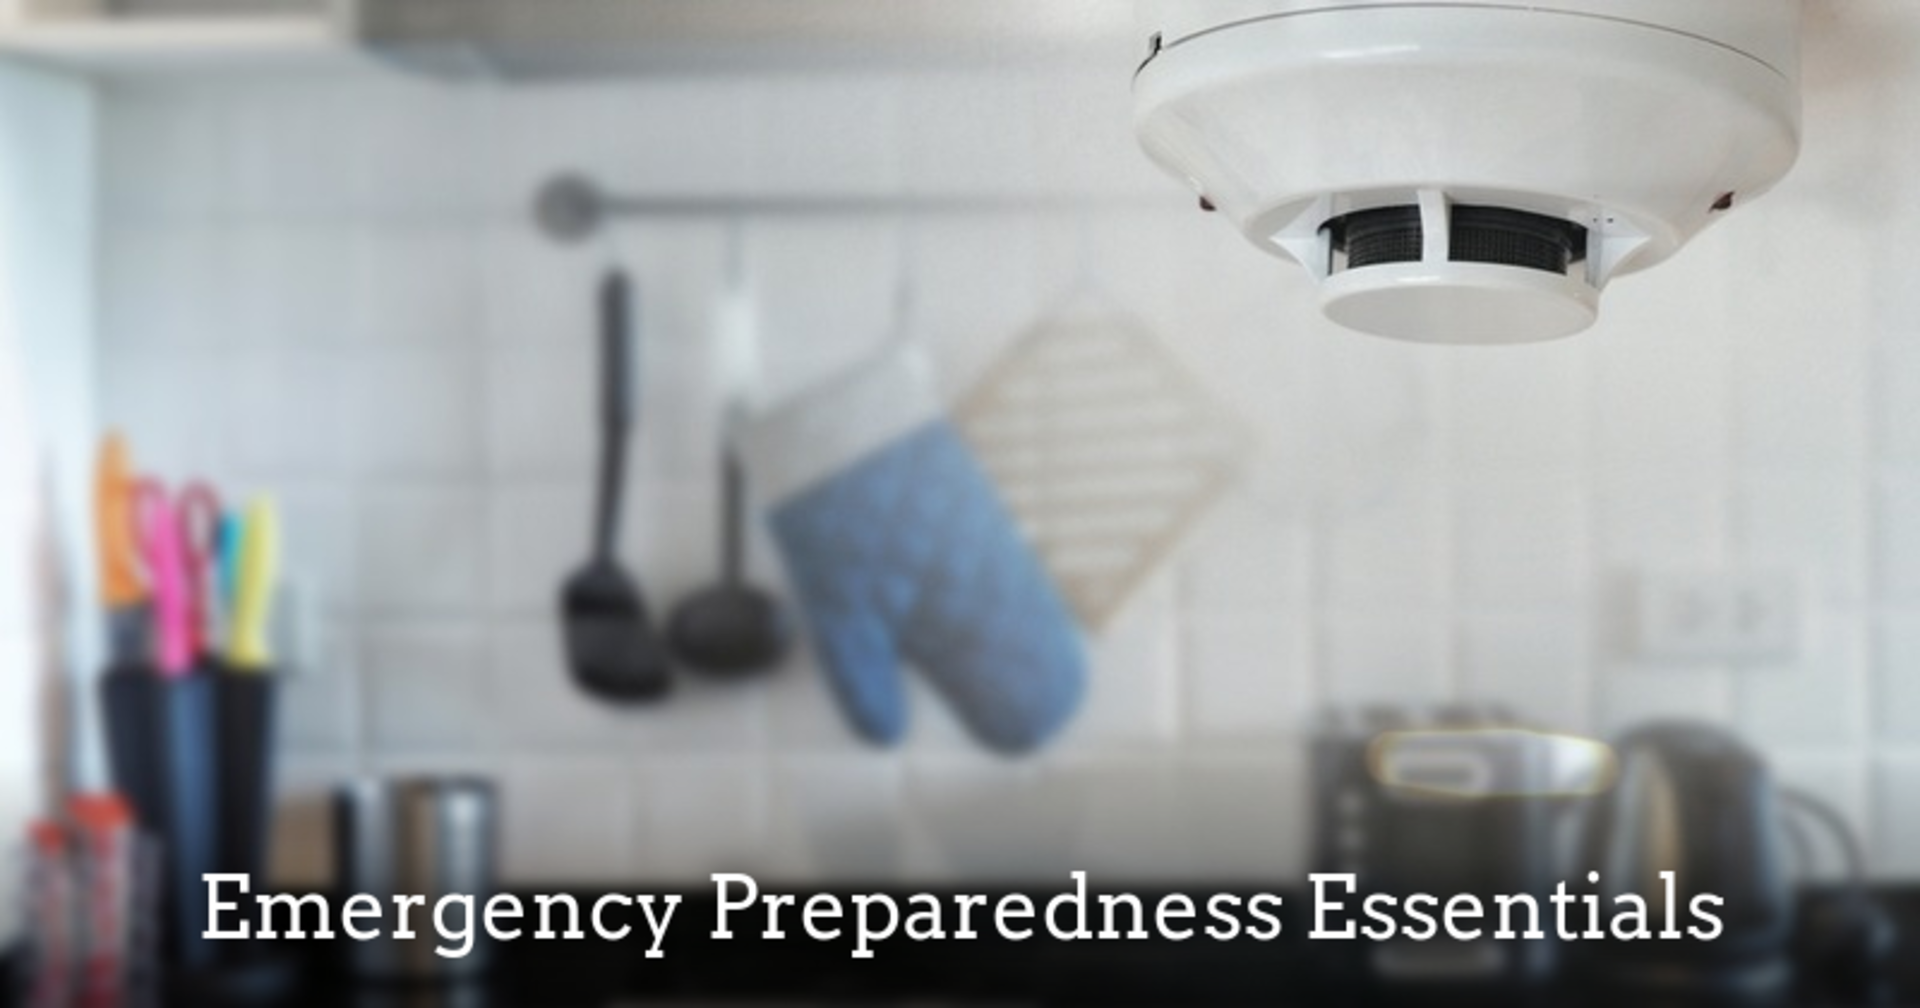 Safety Essentials For Your Home